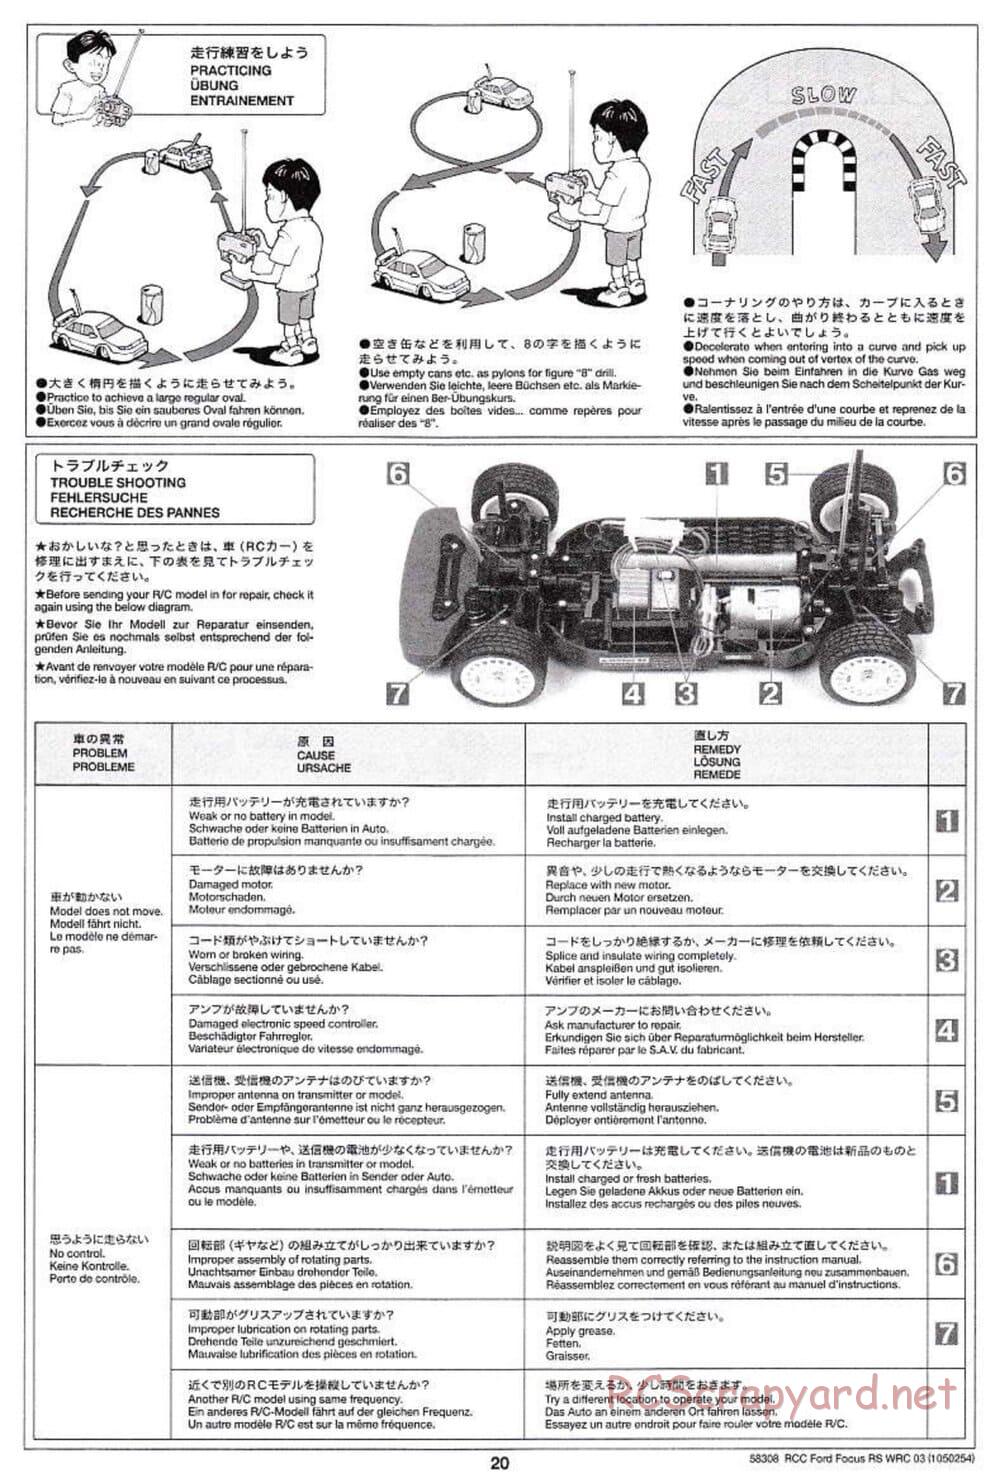 Tamiya - Ford Focus RS WRC 03 - TT-01 Chassis - Manual - Page 20